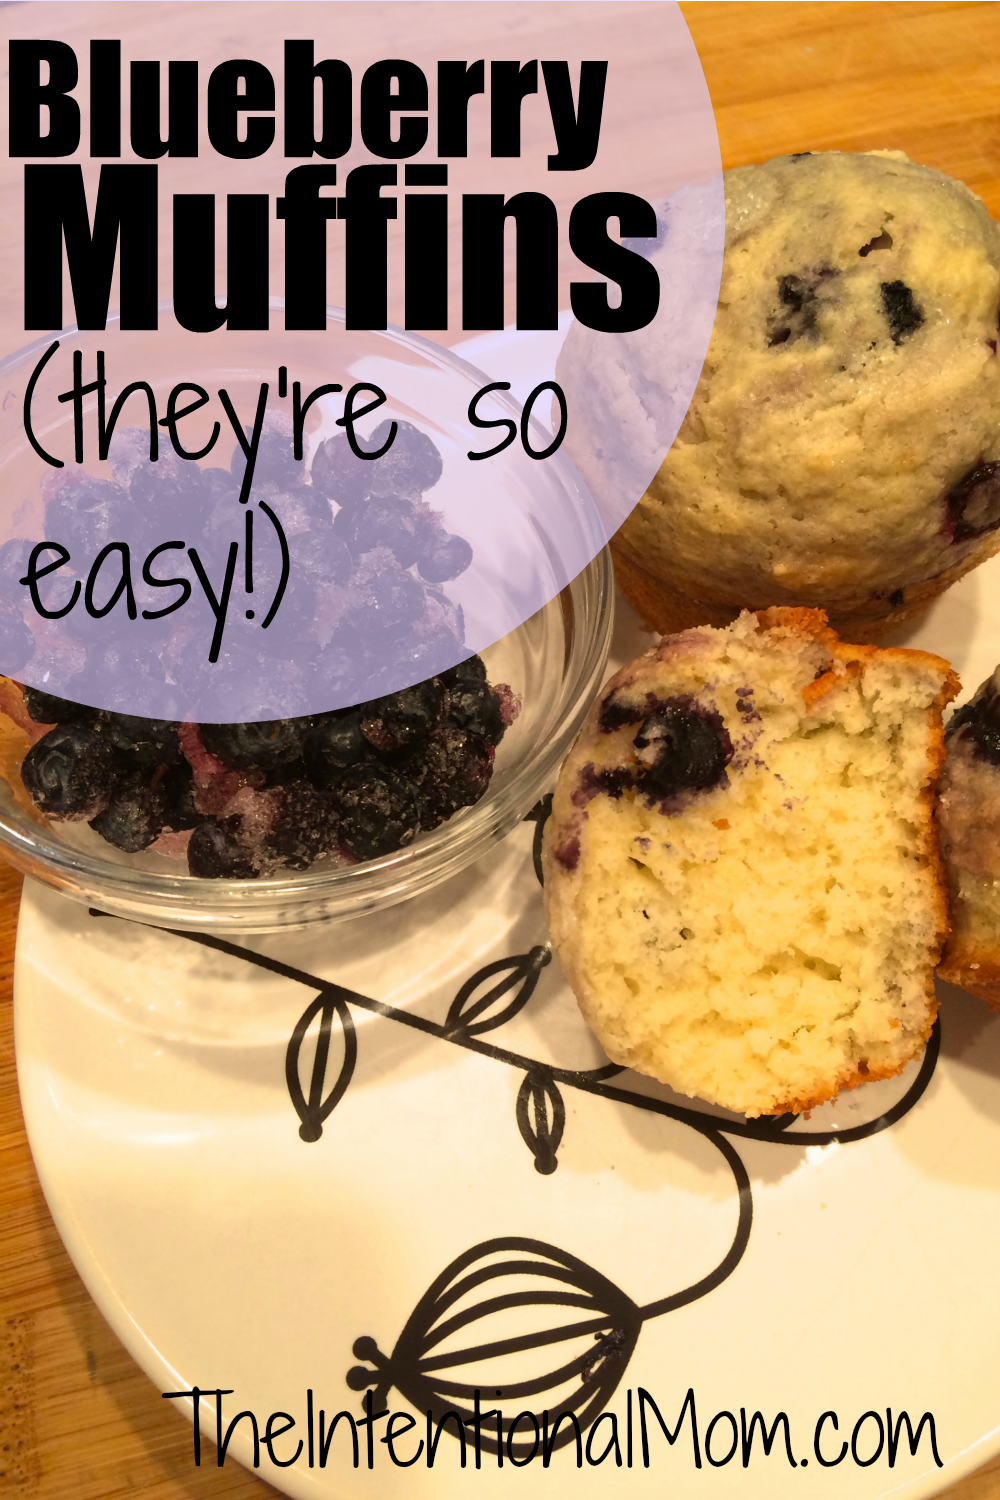 Recipe: Blueberry Muffins and Donut Muffins